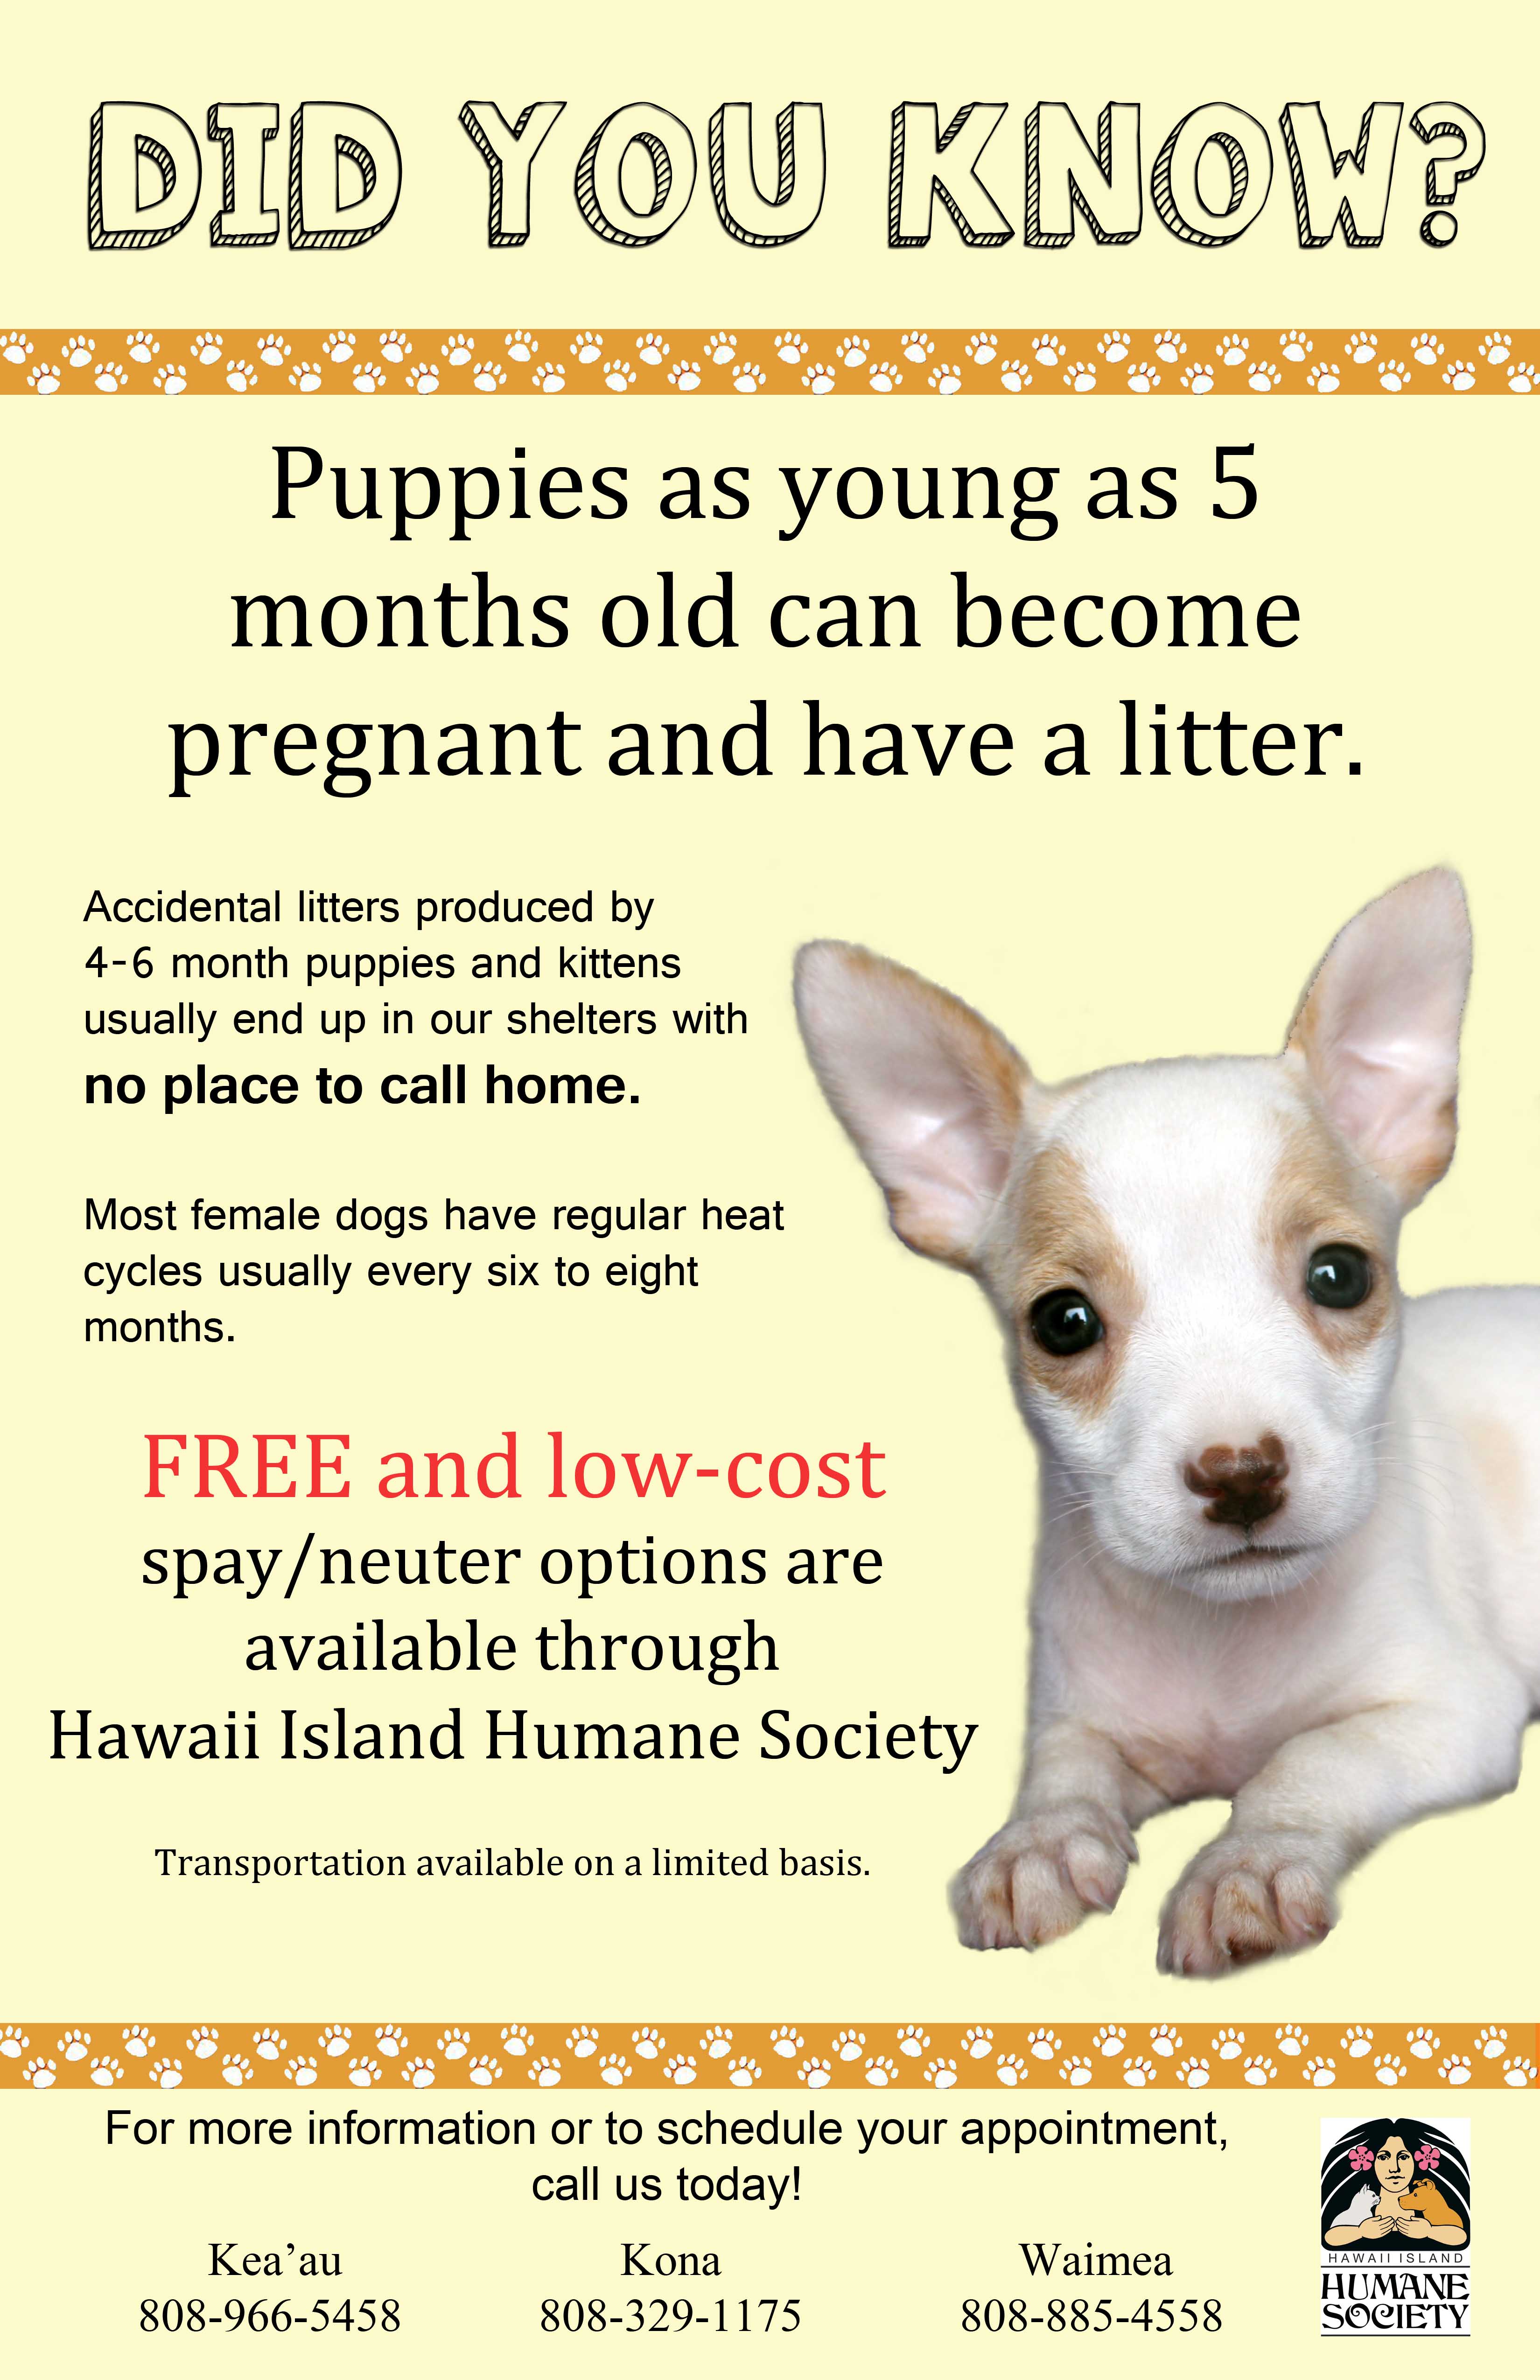 How do you get free neutering for your dogs?